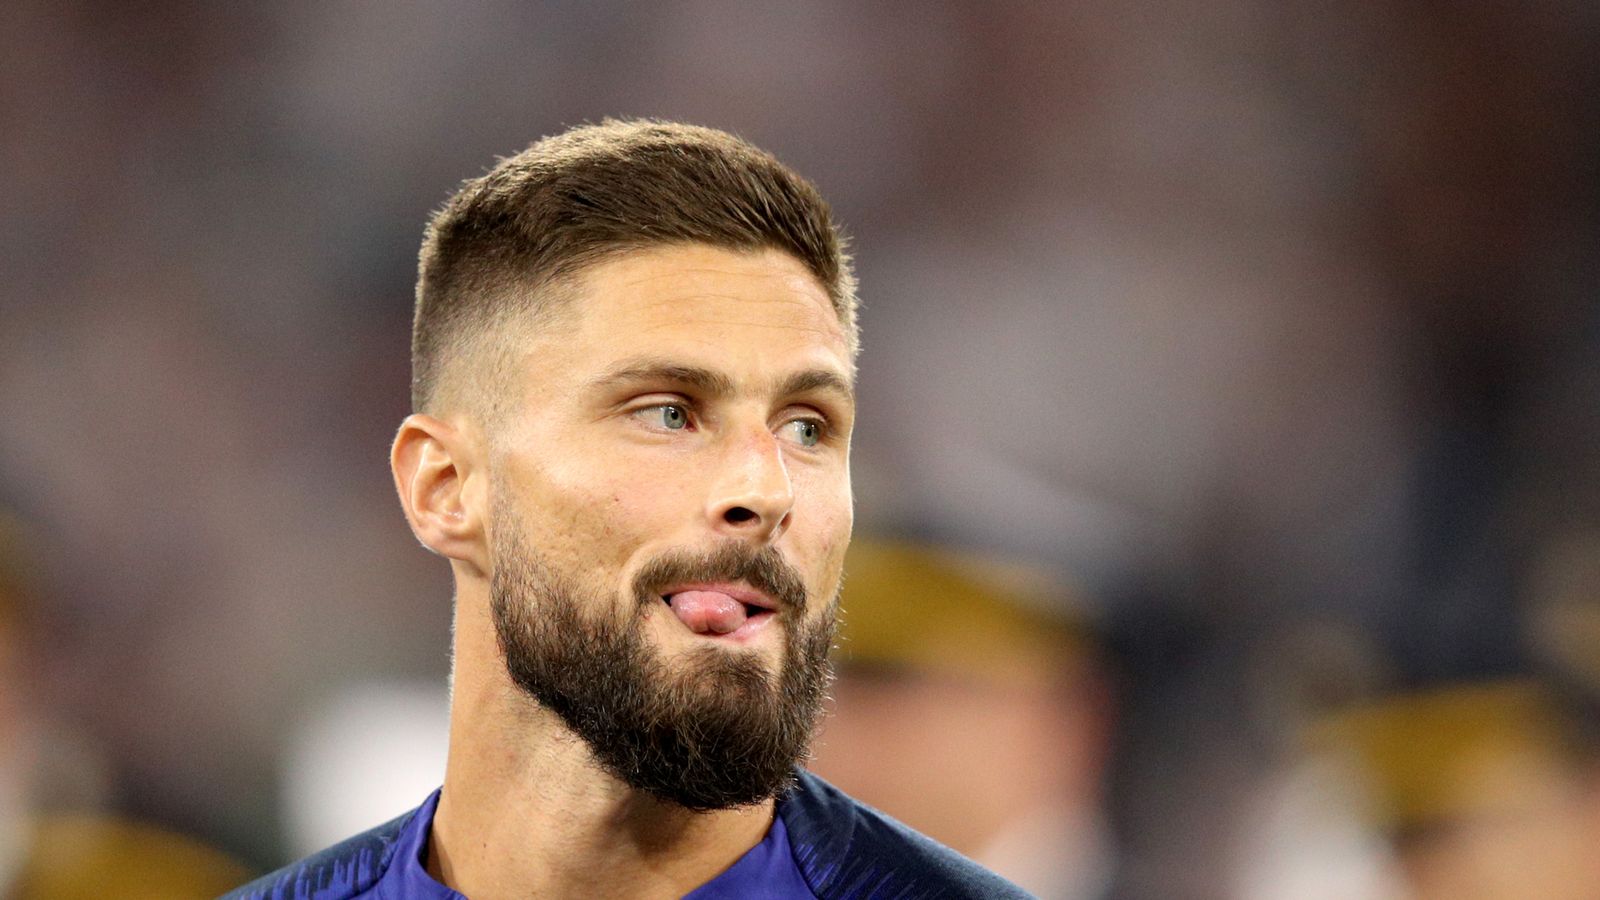  A close-up of French soccer player Olivier Giroud sticking his tongue out while playing for France.